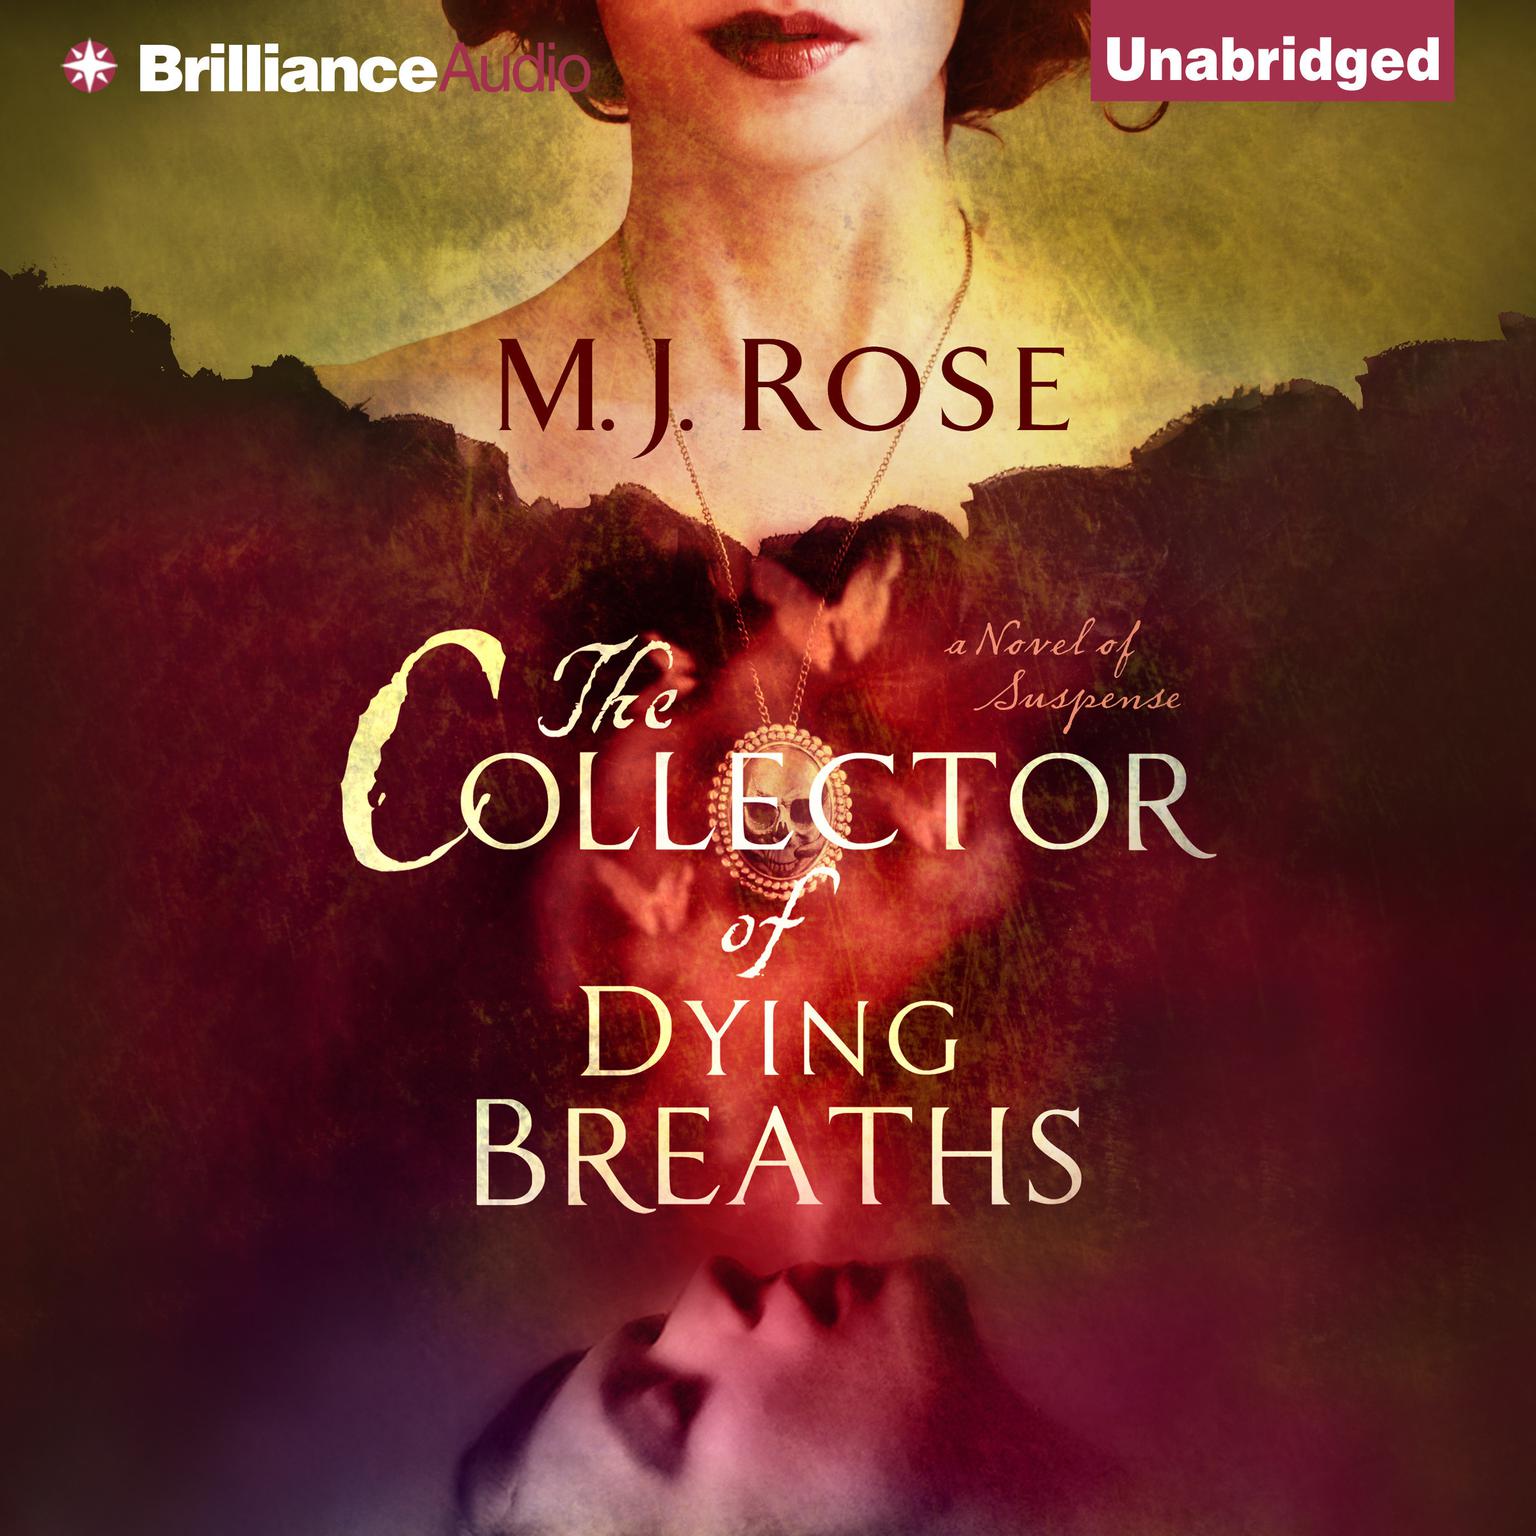 The Collector of Dying Breaths: A Novel of Suspense Audiobook, by M. J. Rose